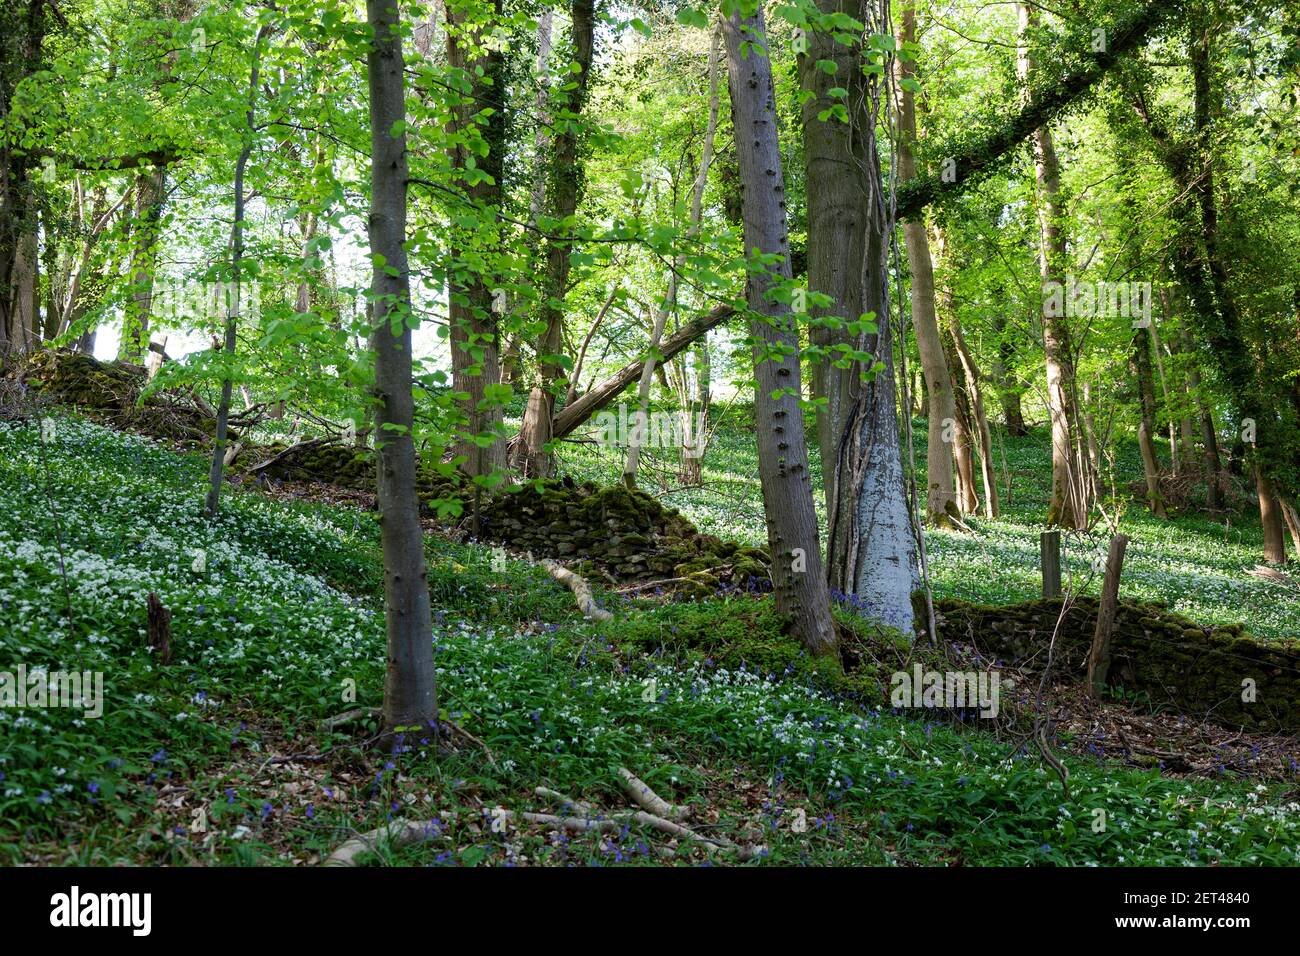 Swathes of wild garlic and bluebells divided by a mossy stone wall in woodland of the Cotswolds near Stroud, Gloucestershire,UK Stock Photo